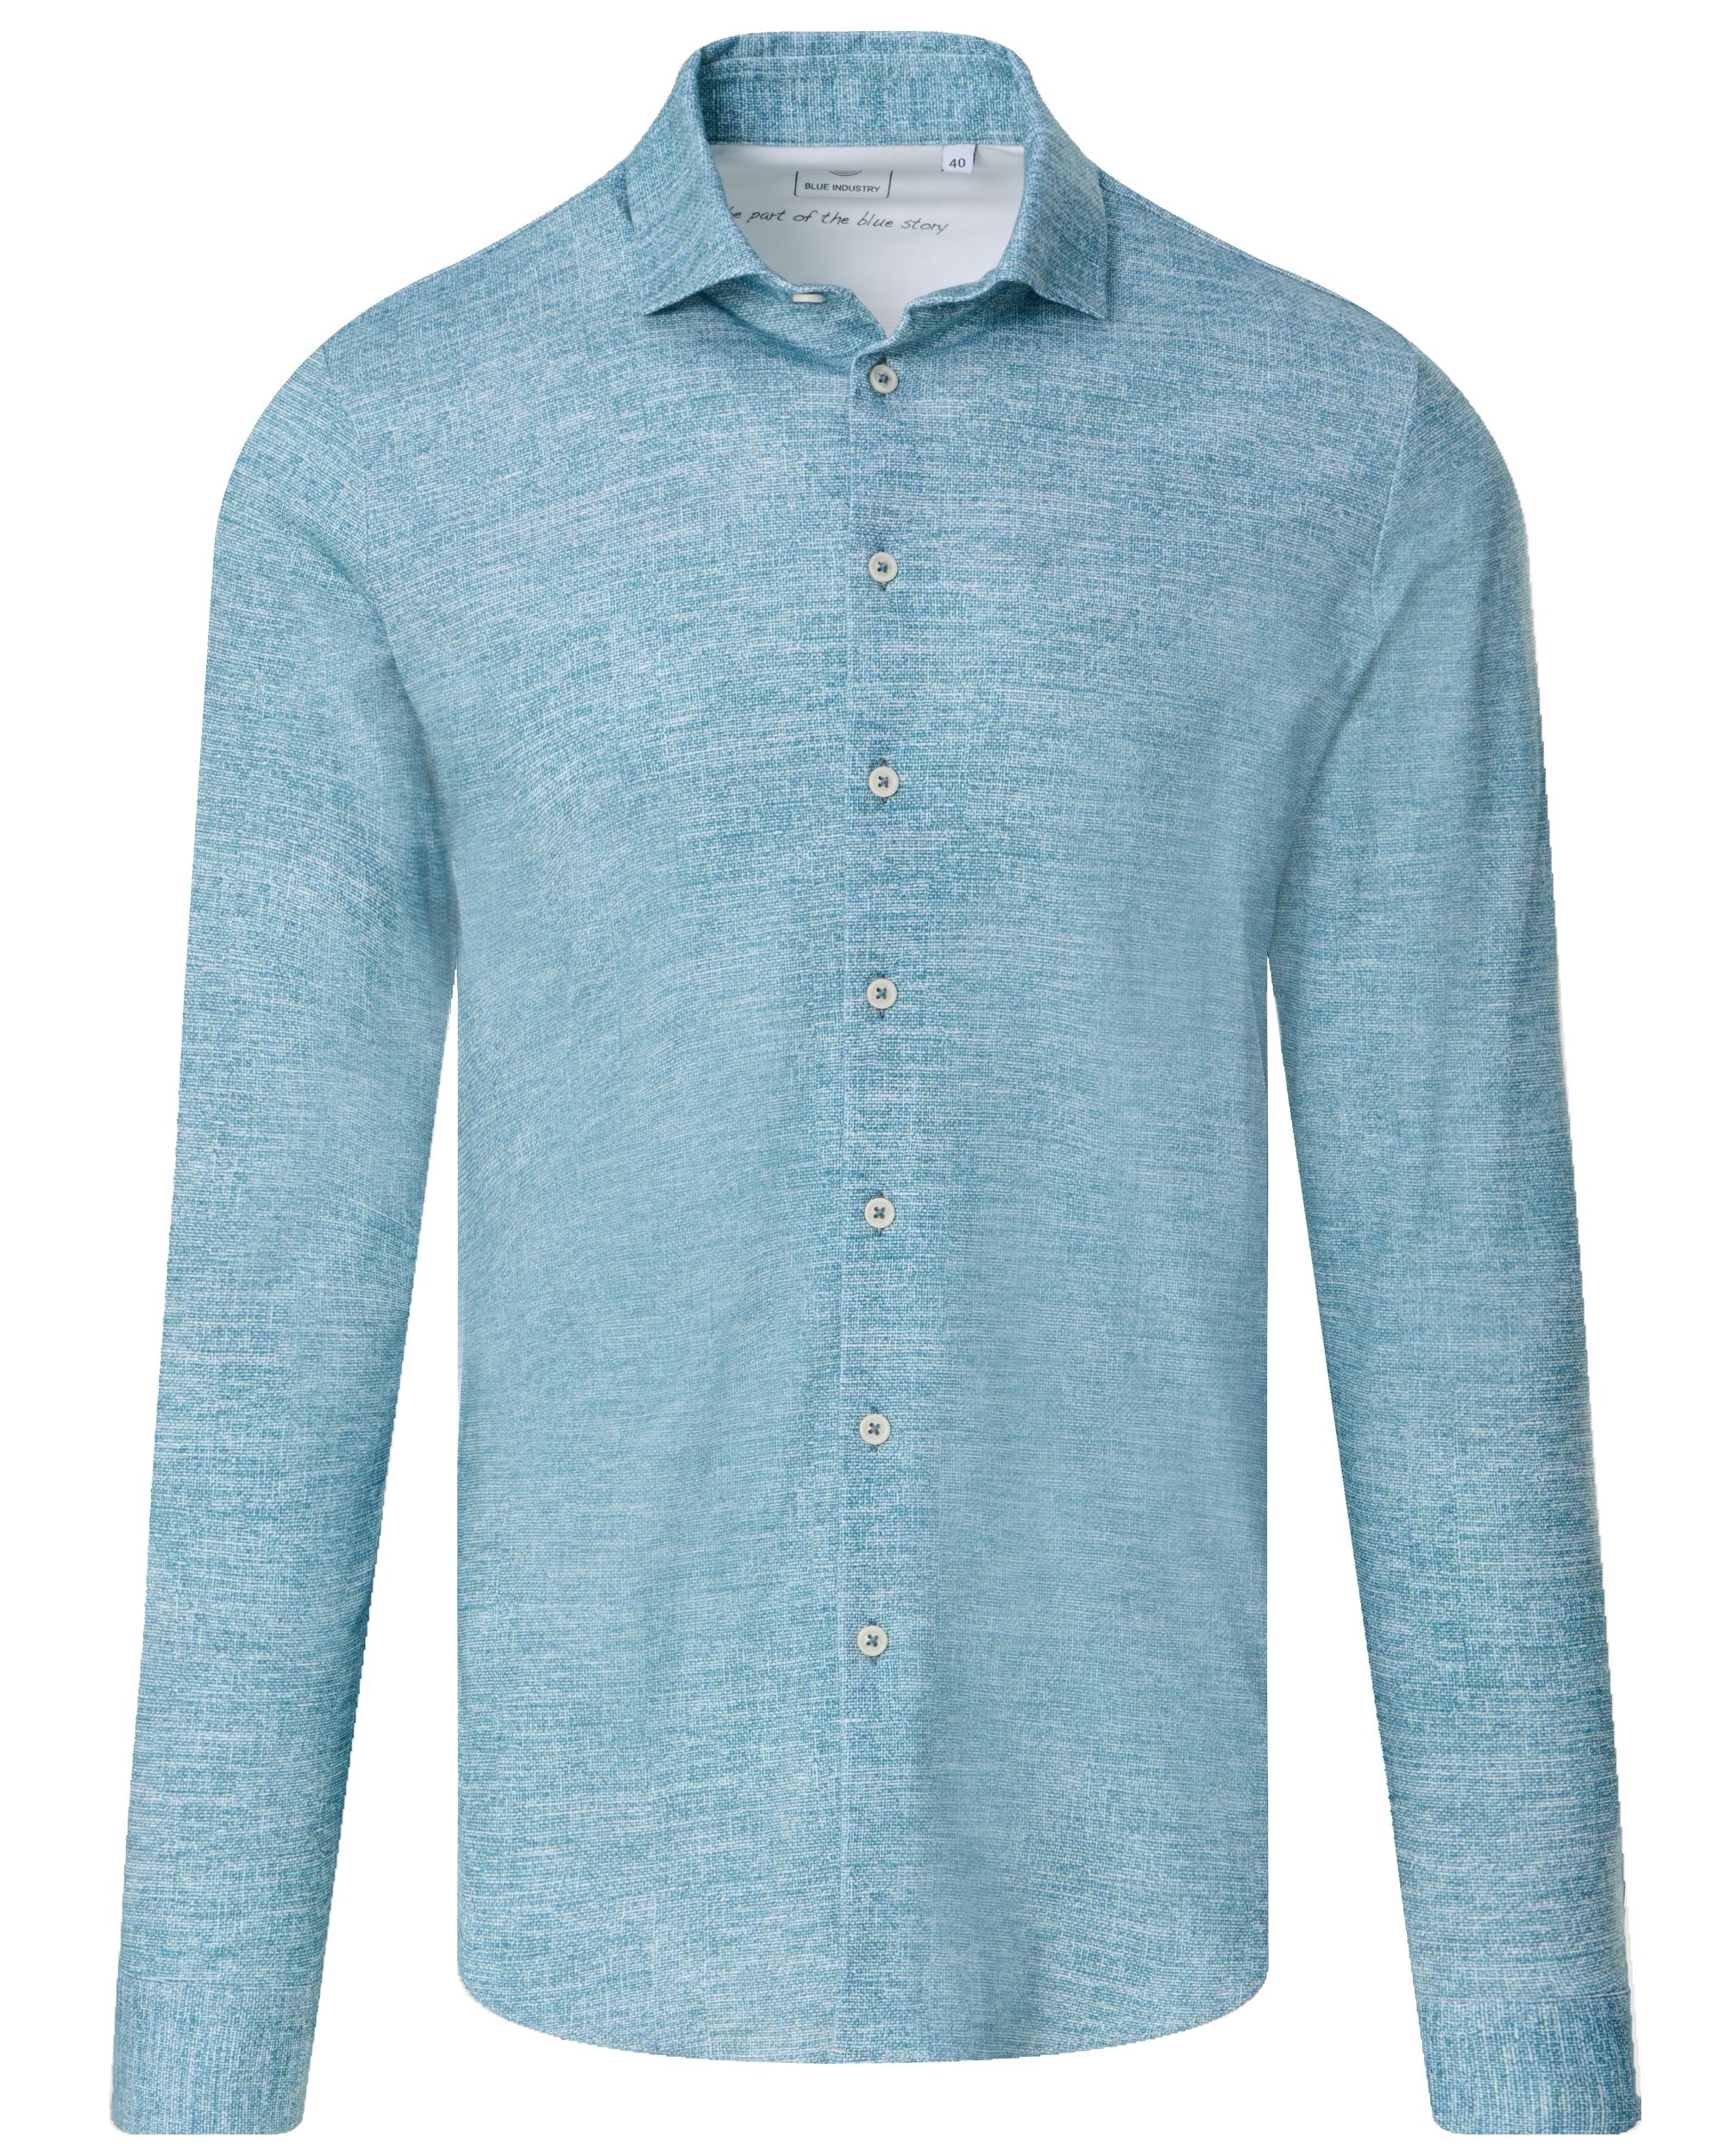 Blue Industry Casual Overhemd LM Blauw 092877-001-37